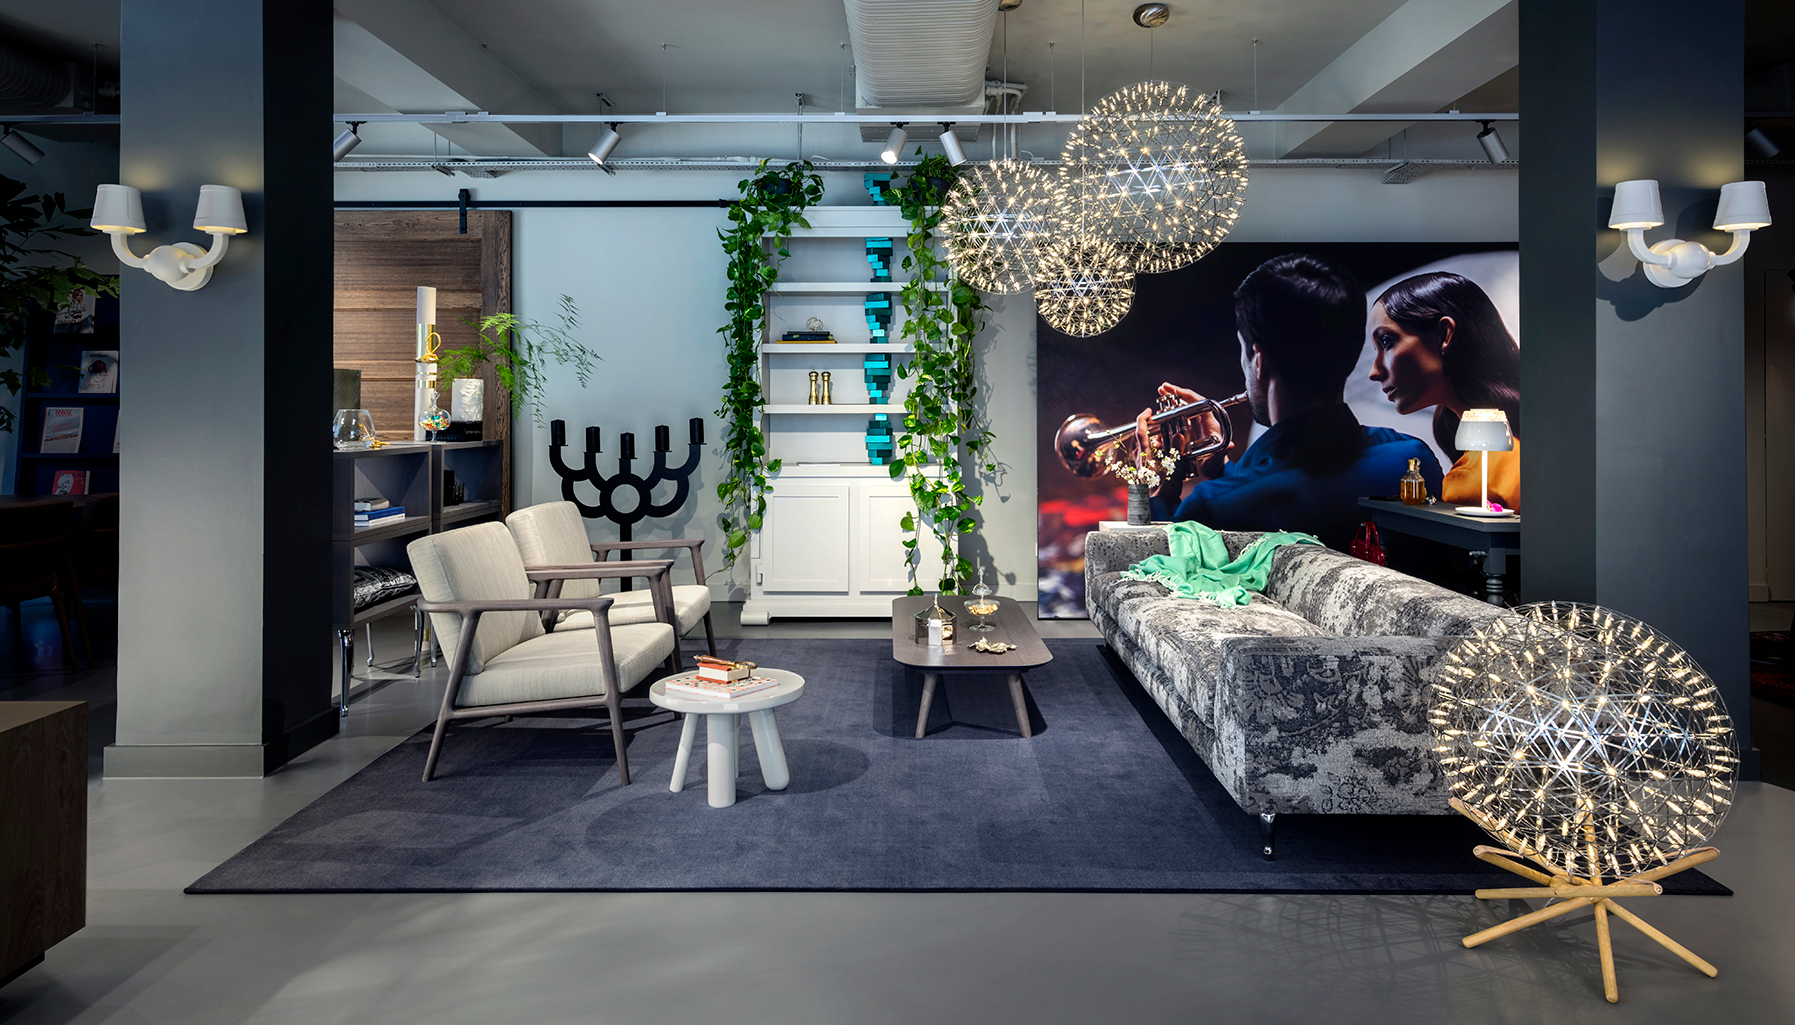 6 things to know about Marcel Wanders